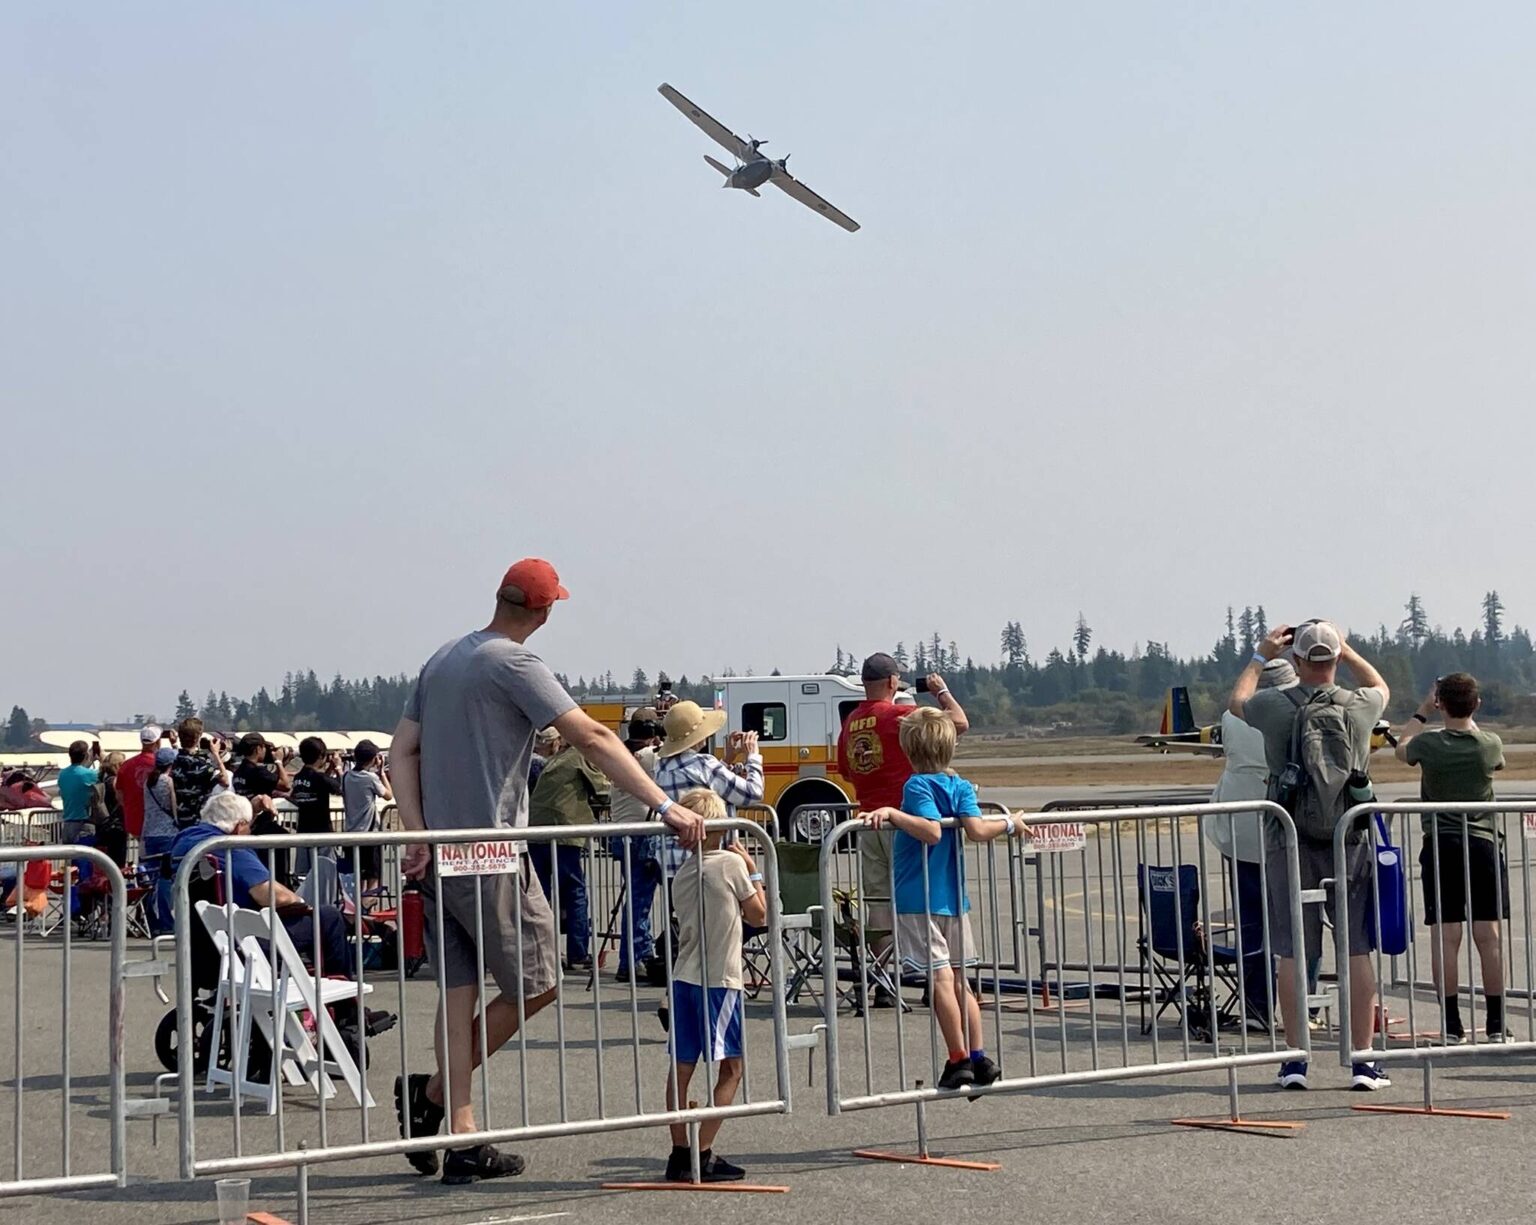 New airshow takes off in Bremerton Kitsap Daily News